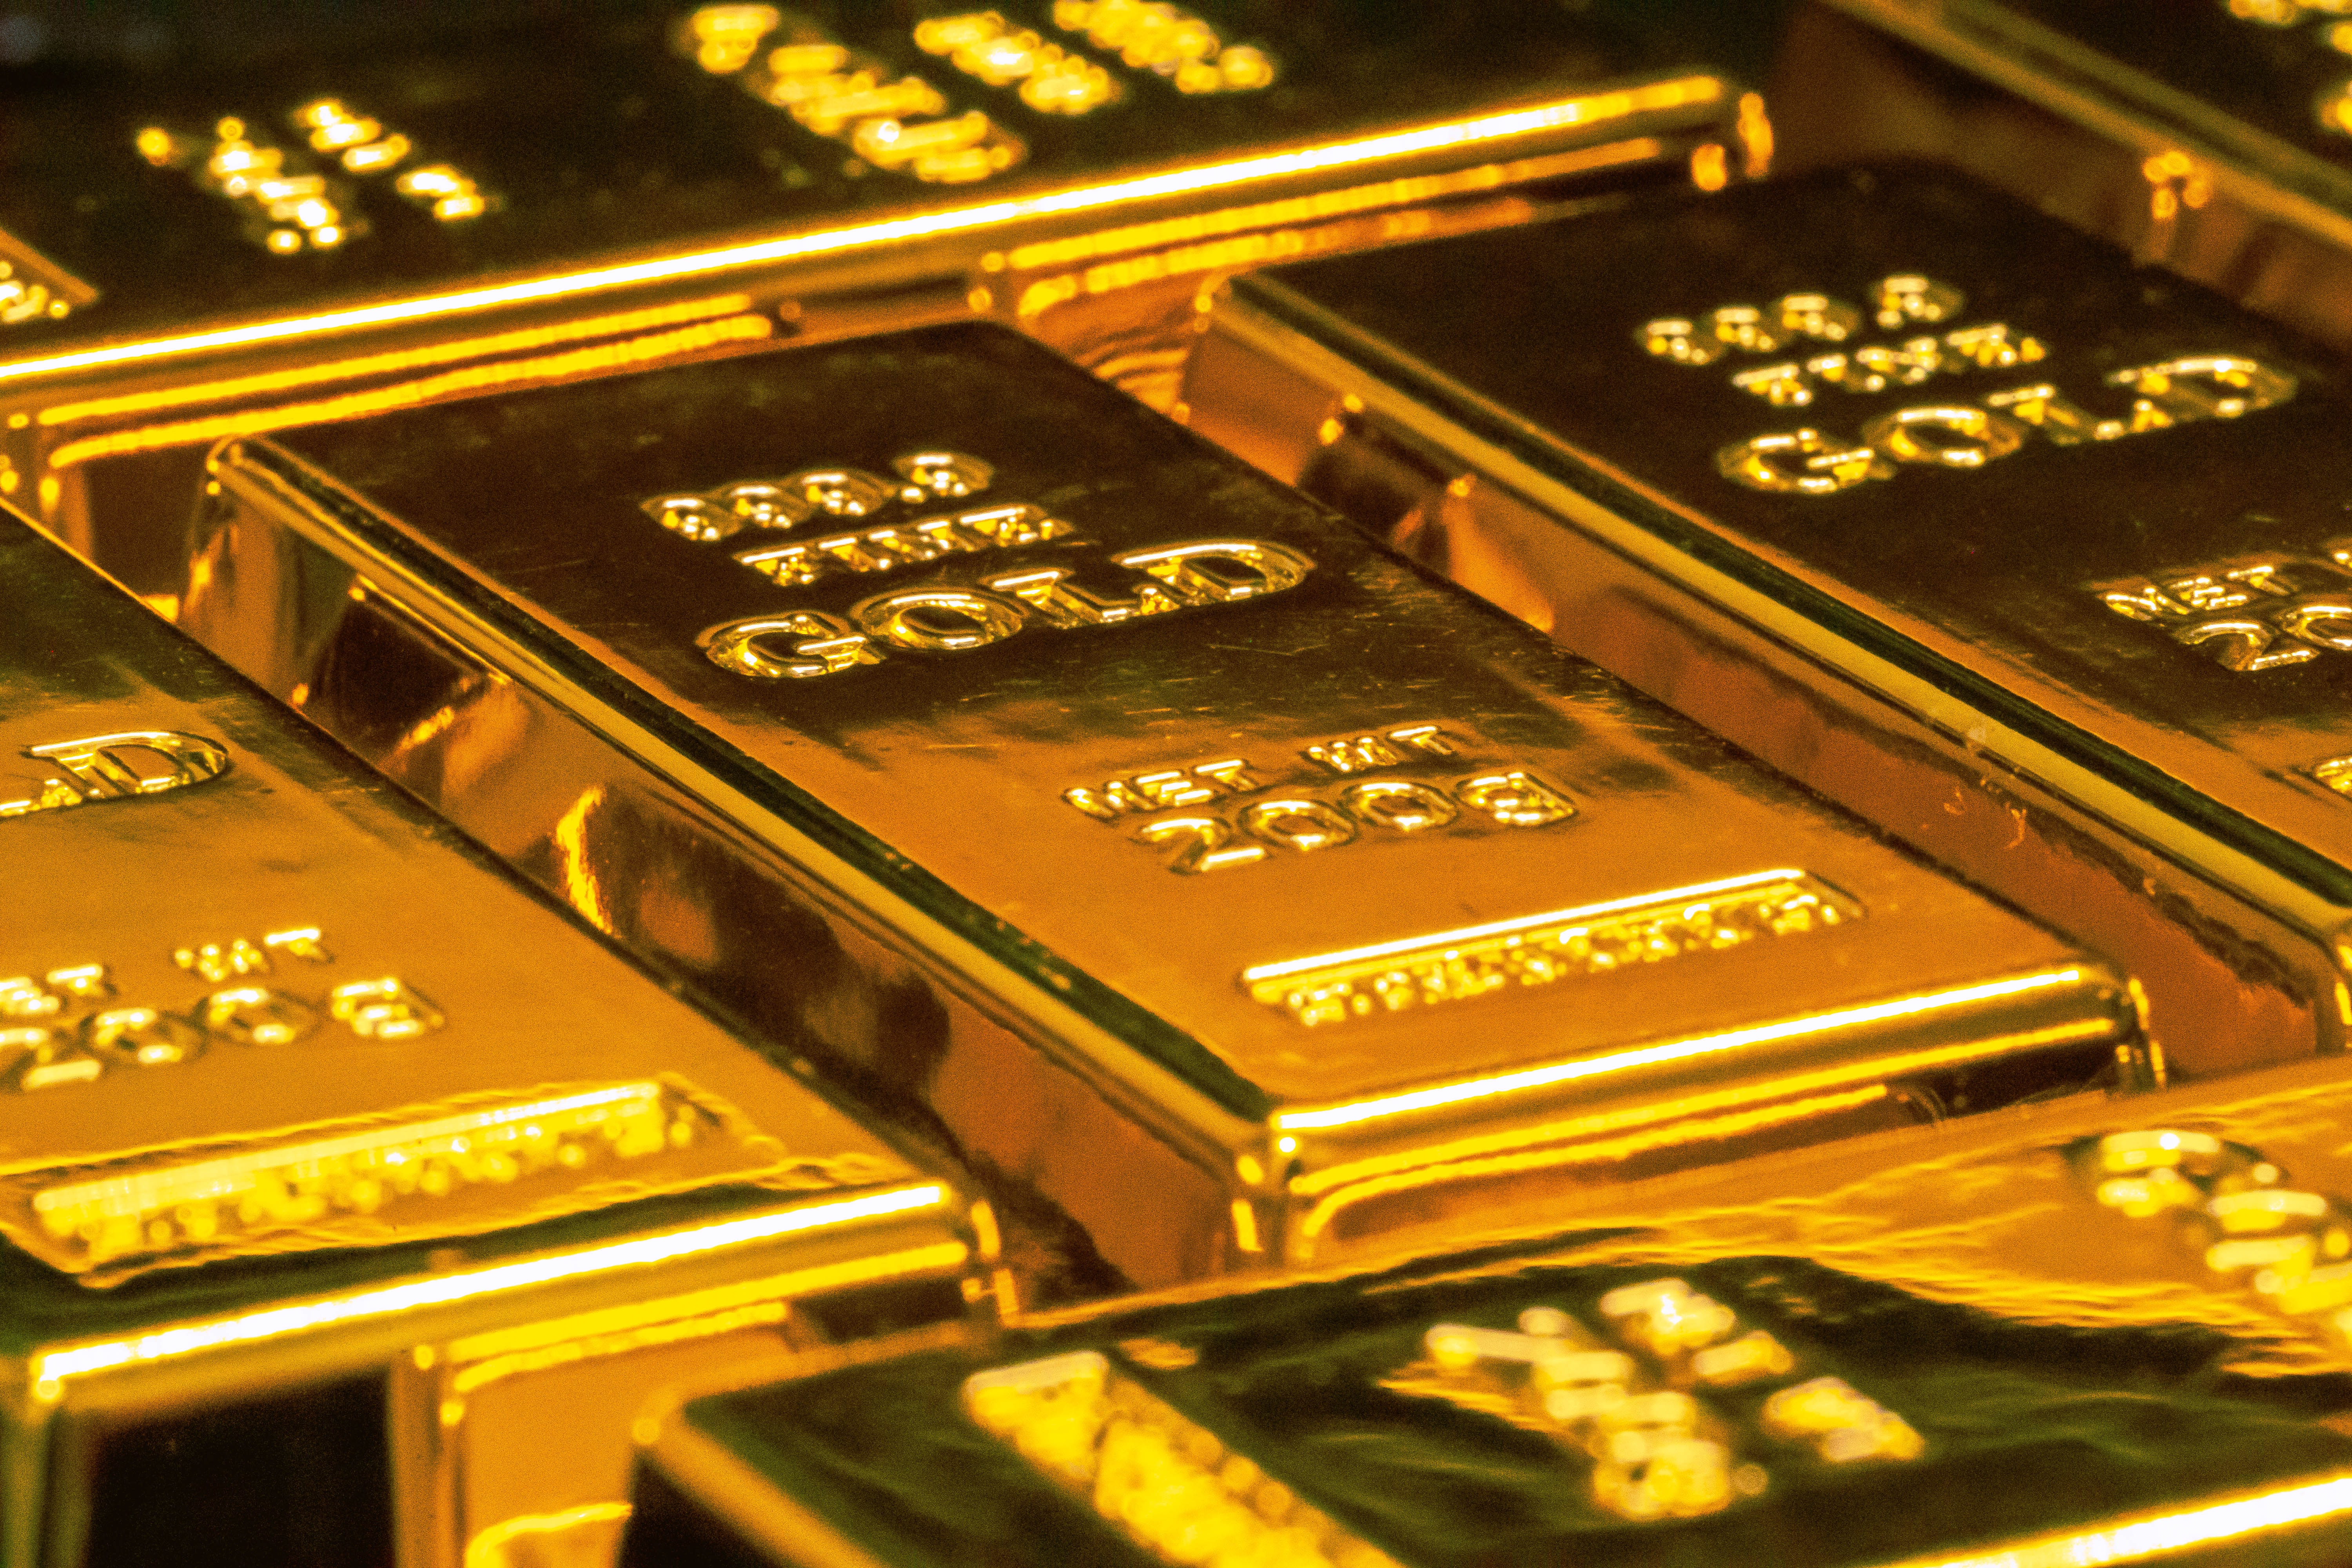 Gold bars - a popular investment, when the economy is troubled